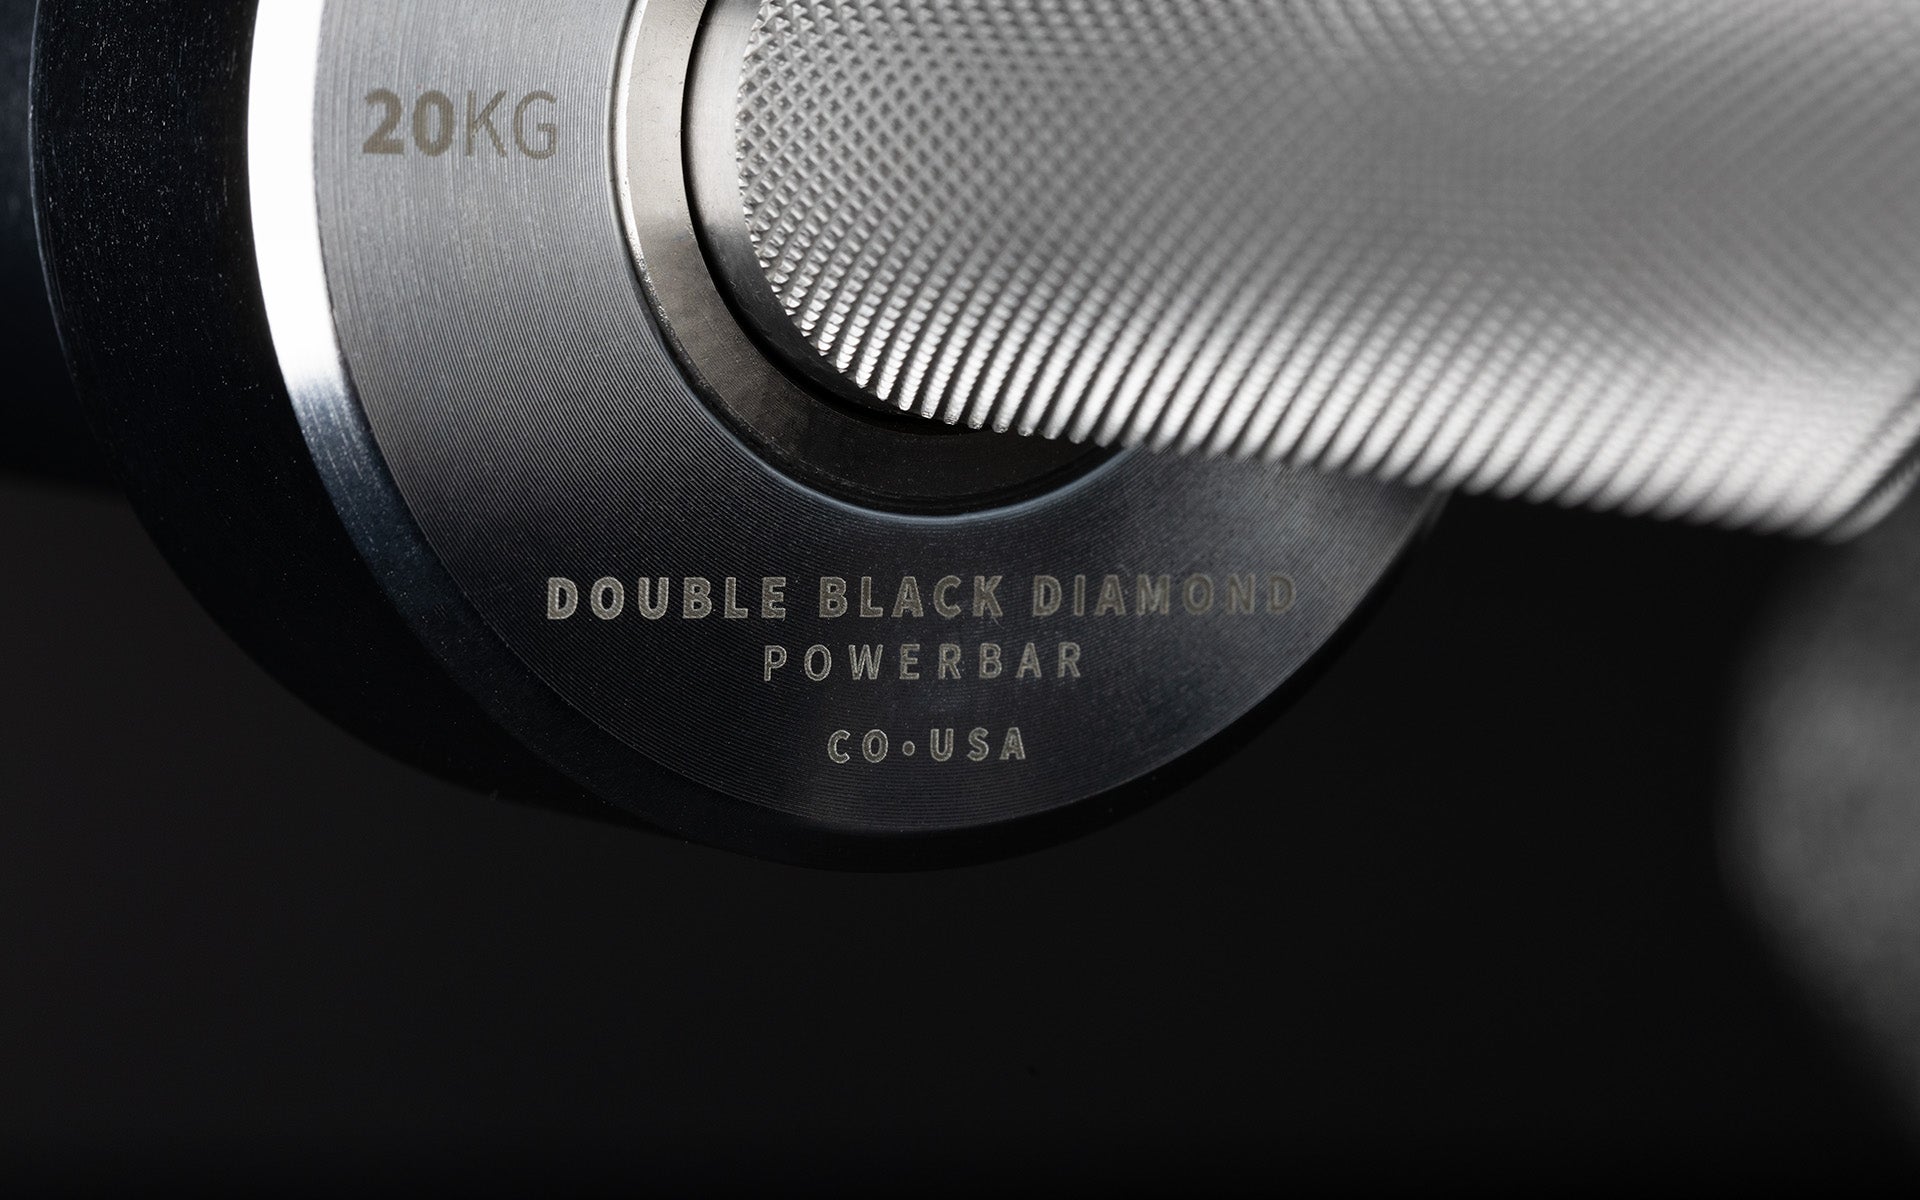 Close-up view of the laser-etched labeling on the inside of the sleeve of a REP Double Black Diamond Power Bar.